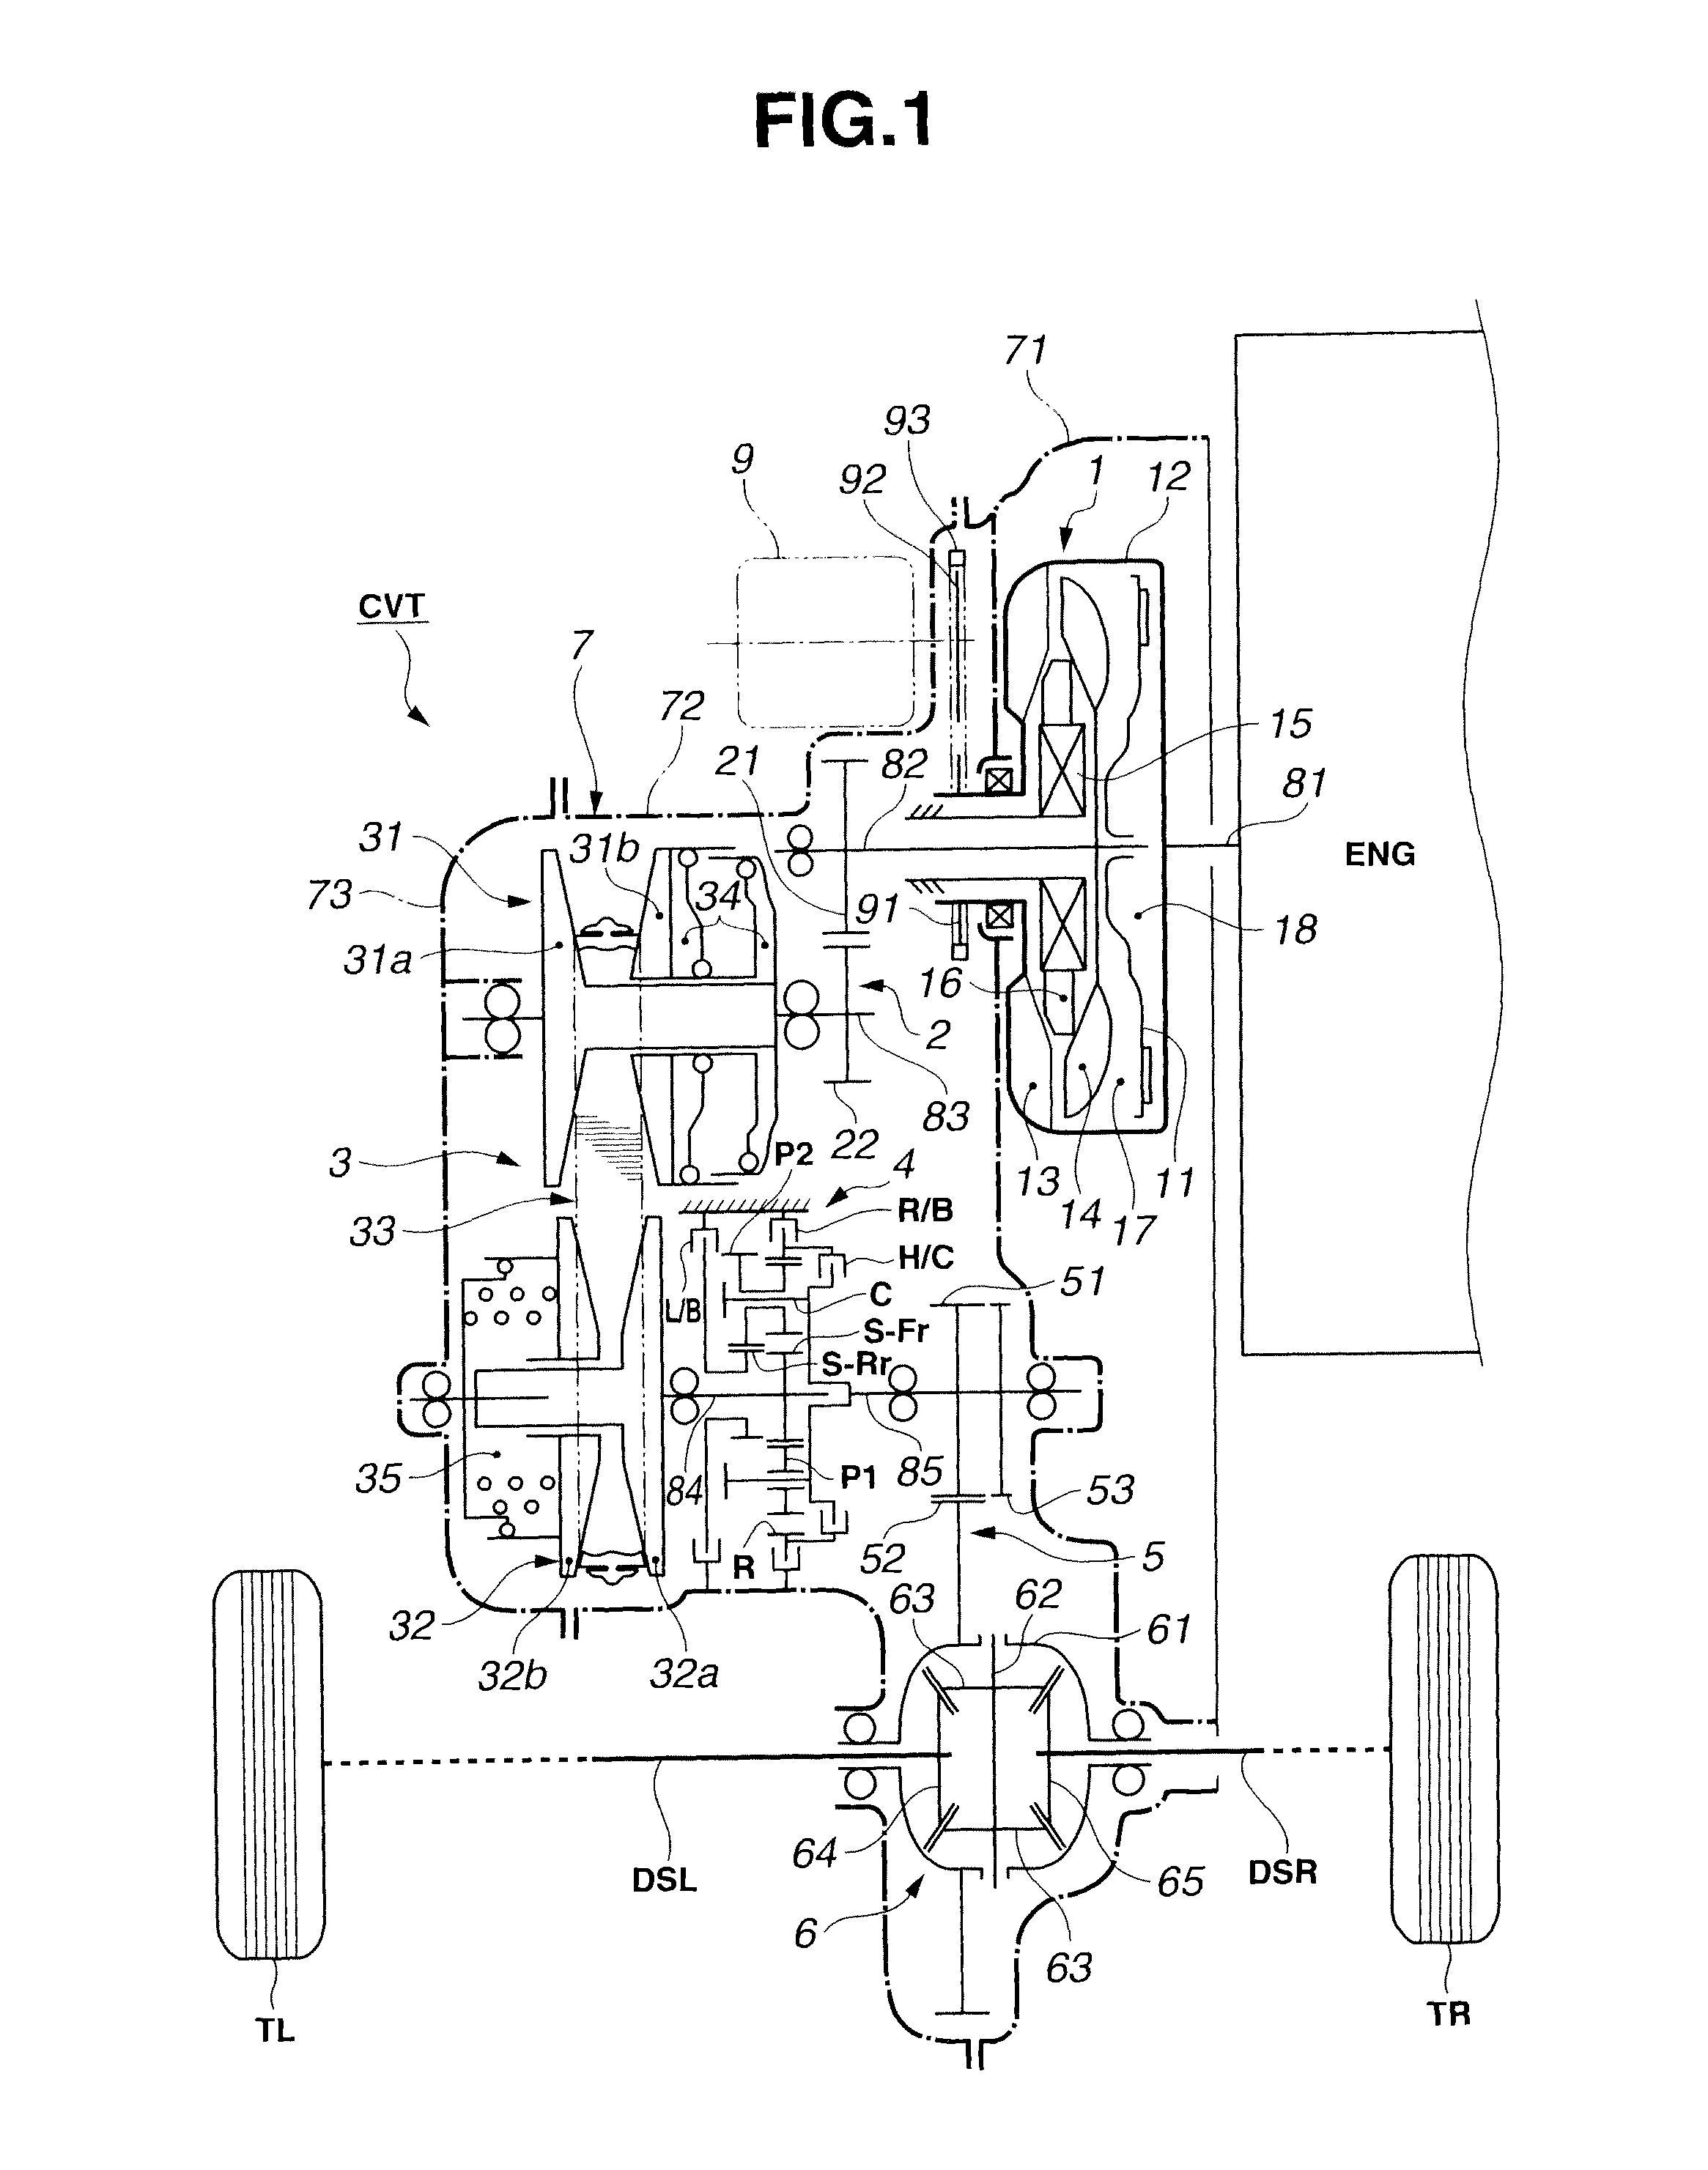 Continuously-variable transmission for vehicle